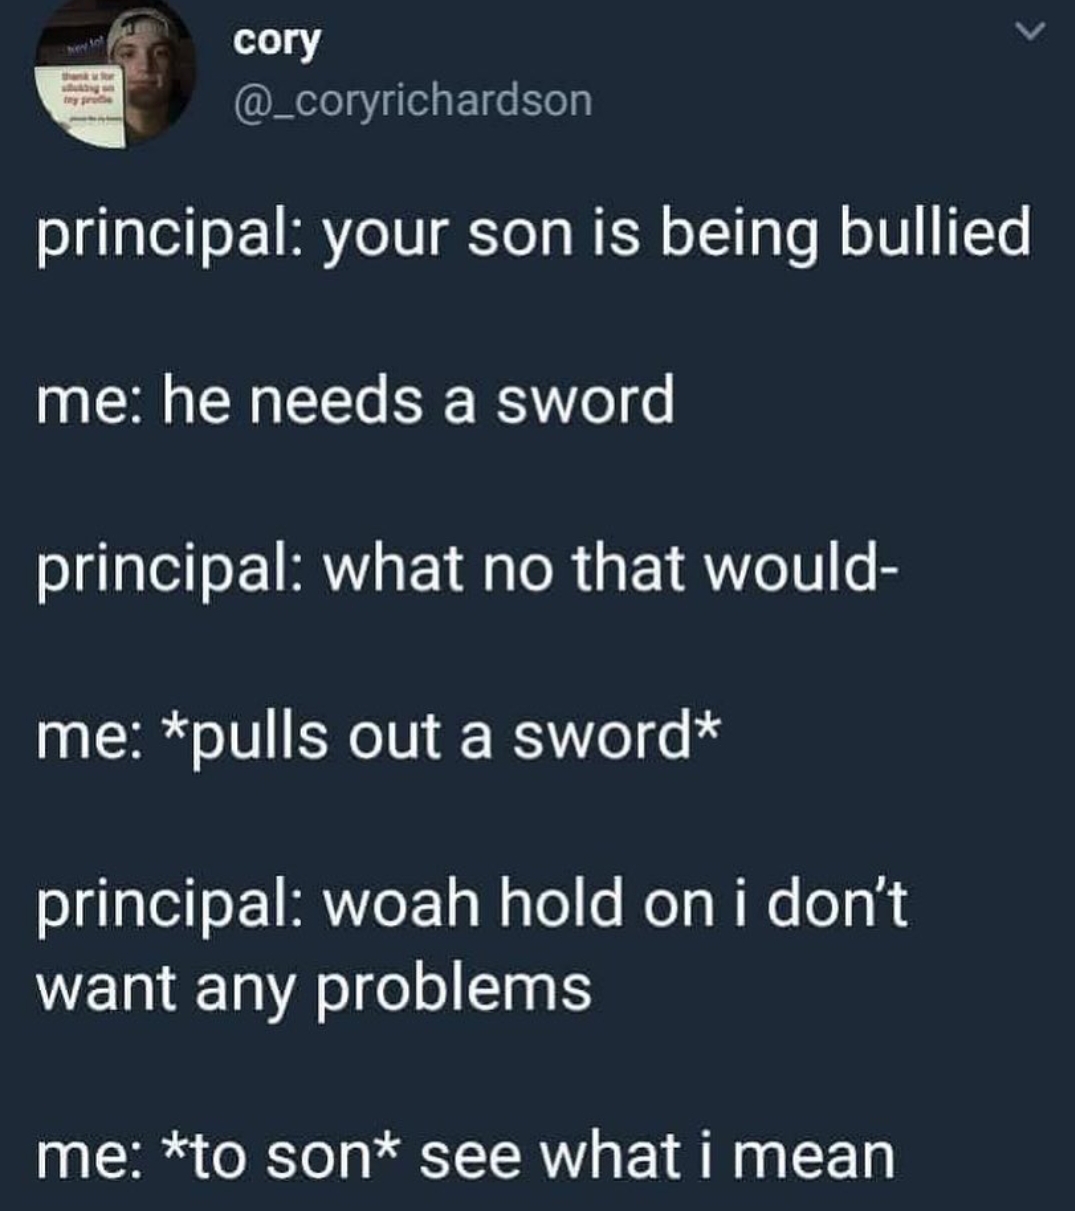 sword meme - cory principal your son is being bullied me he needs a sword principal what no that would t me pulls out a sword principal woah hold on i don't want any problems me to son see what i mean